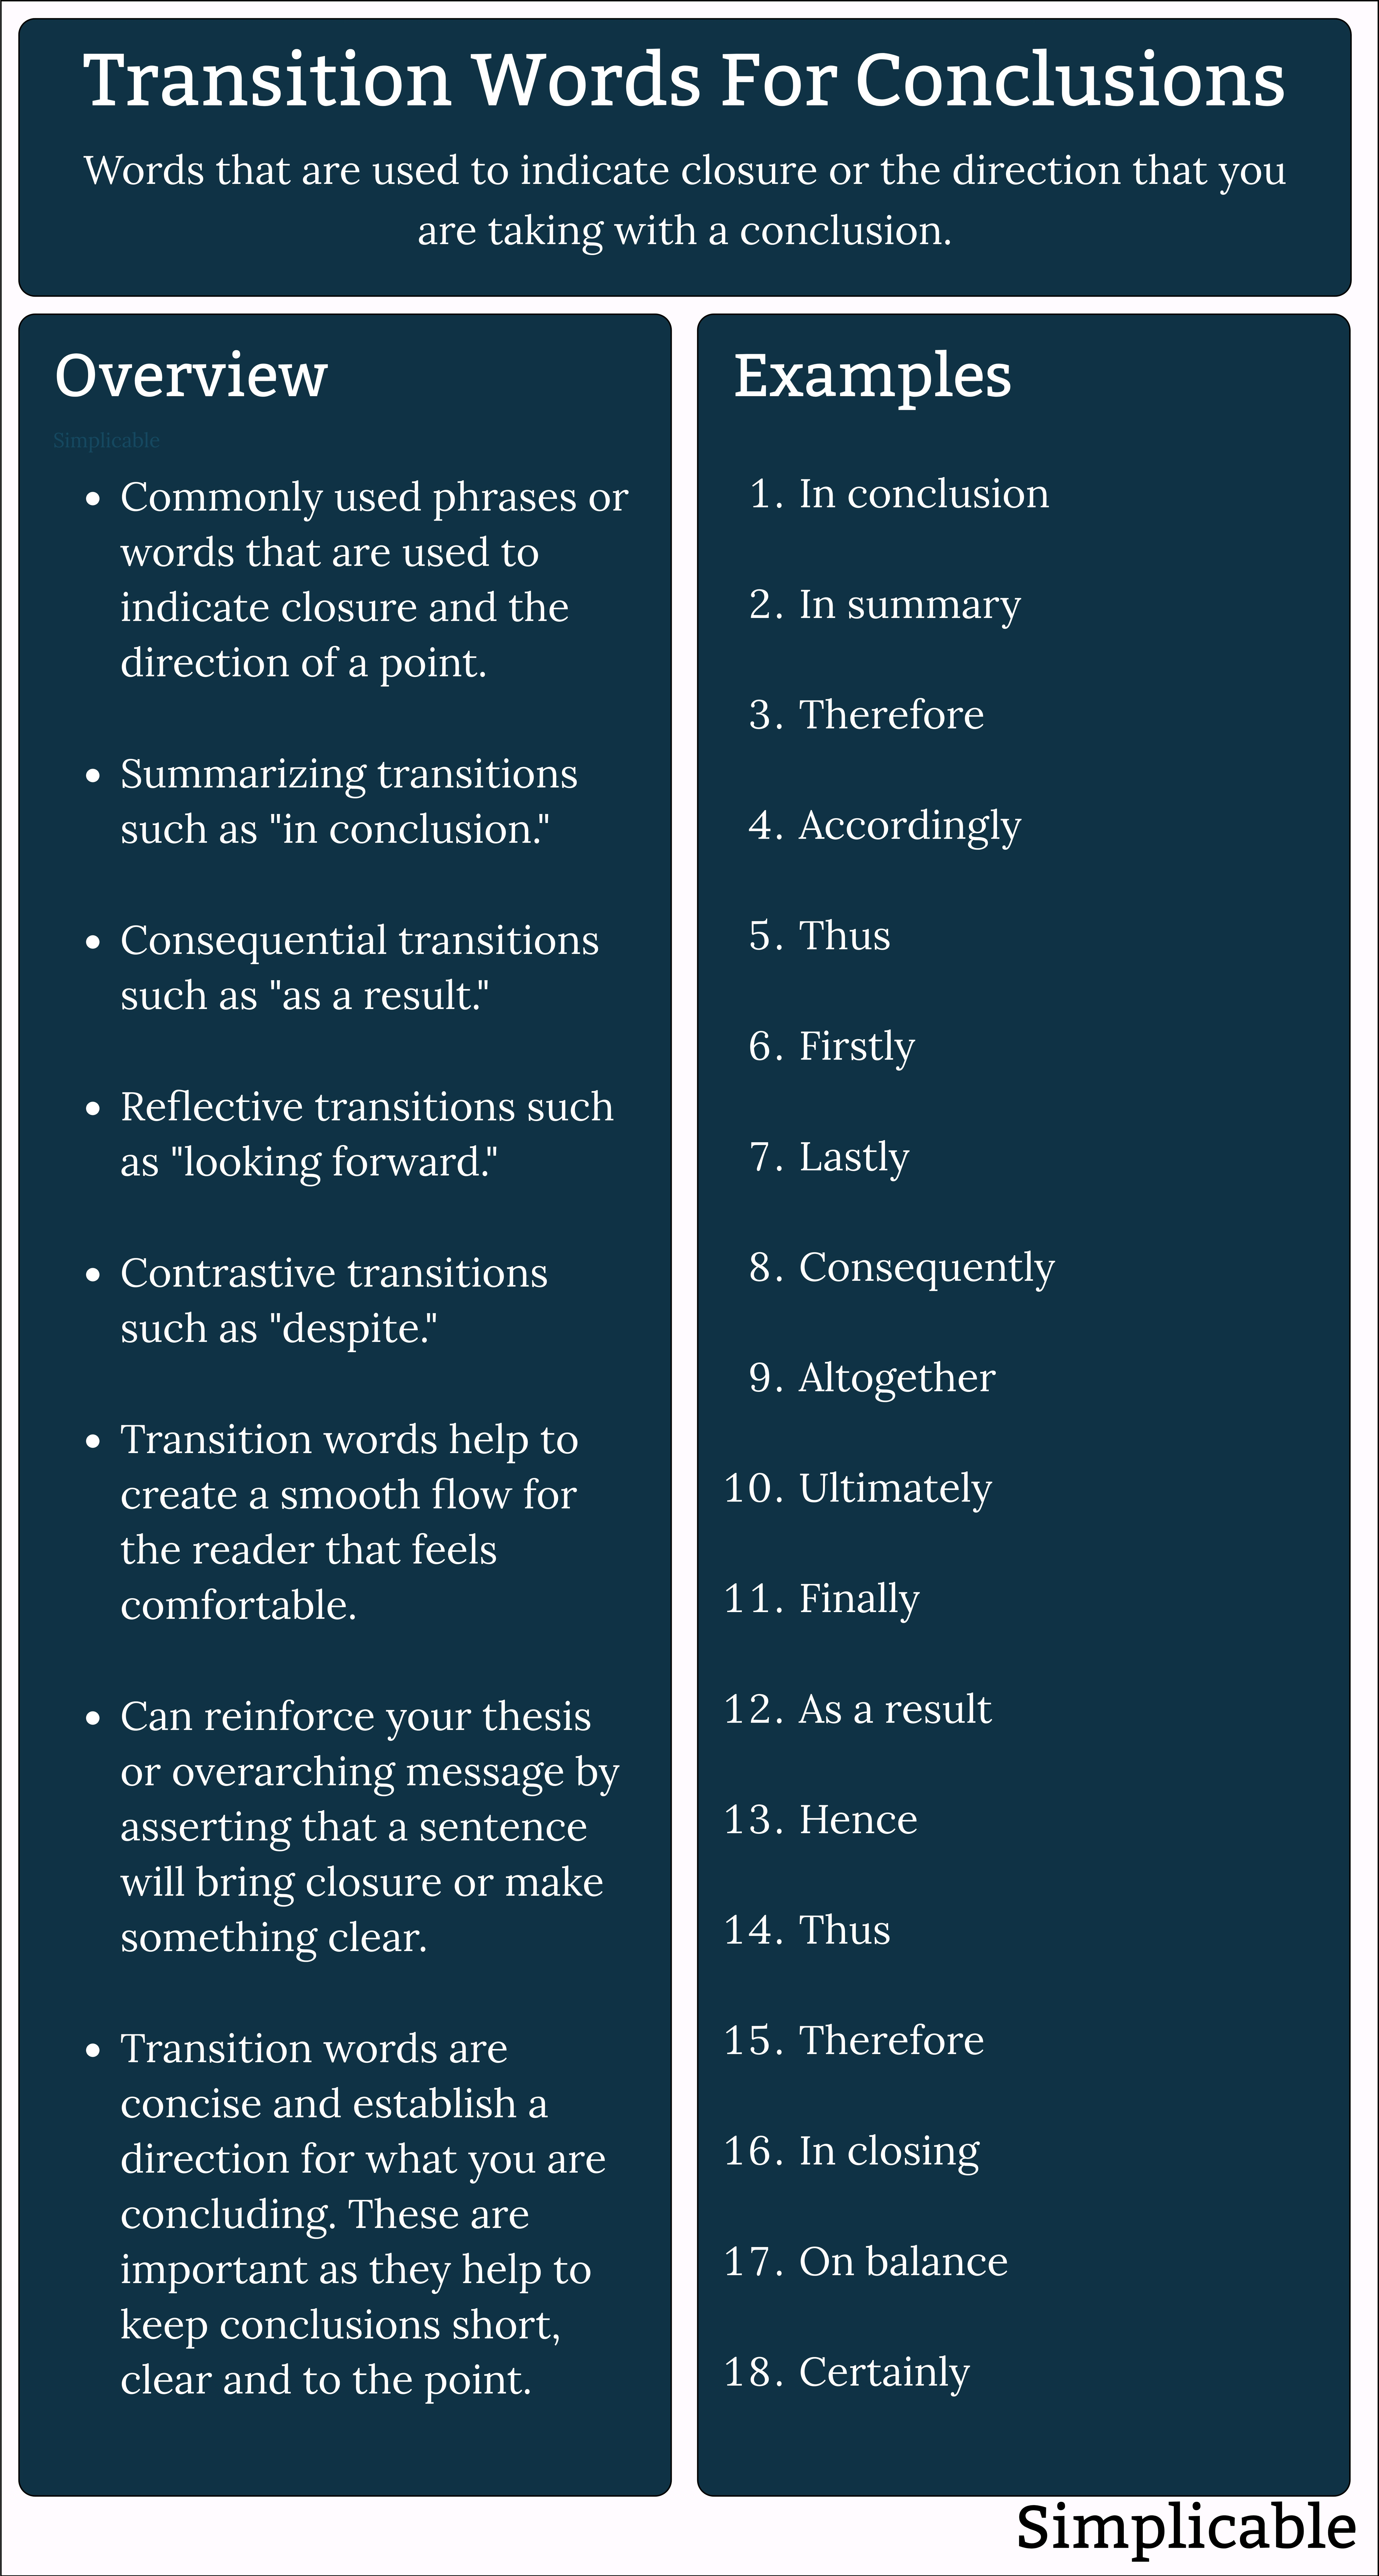 transition words for conclusions definition and examples